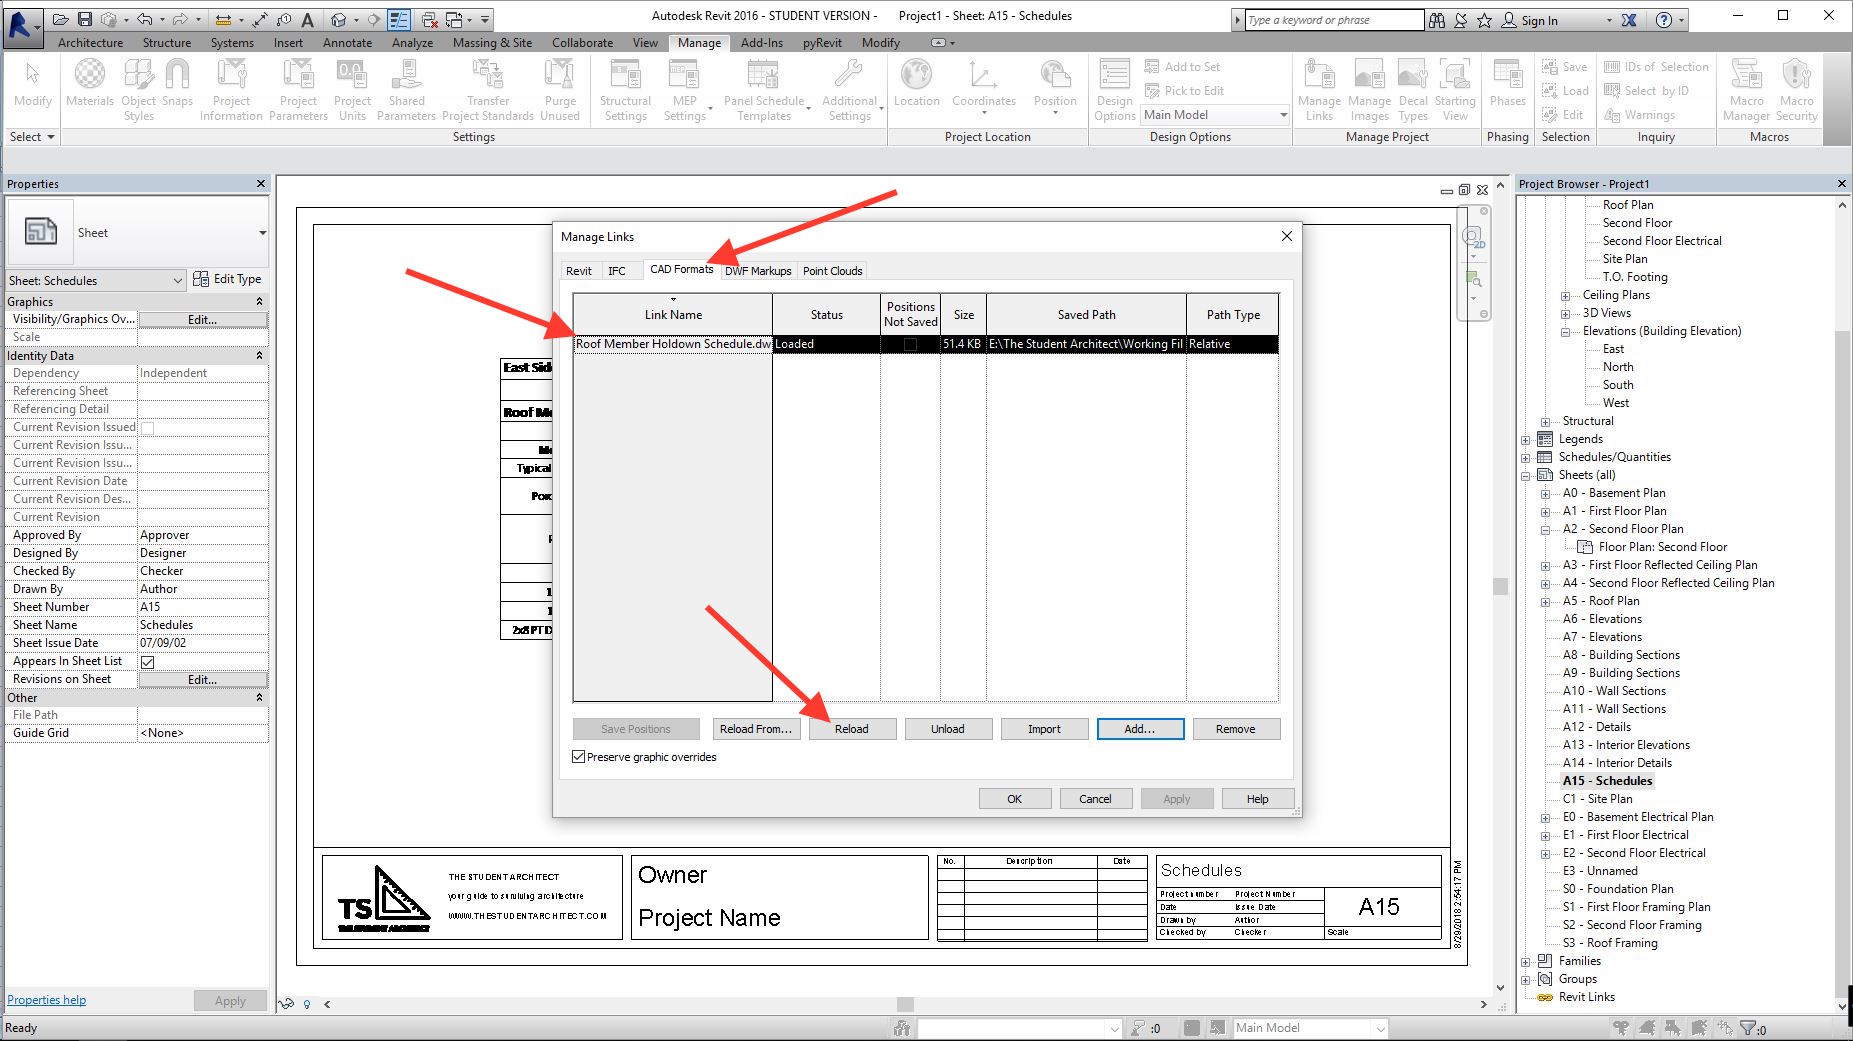 Insert Excel Into Autocad